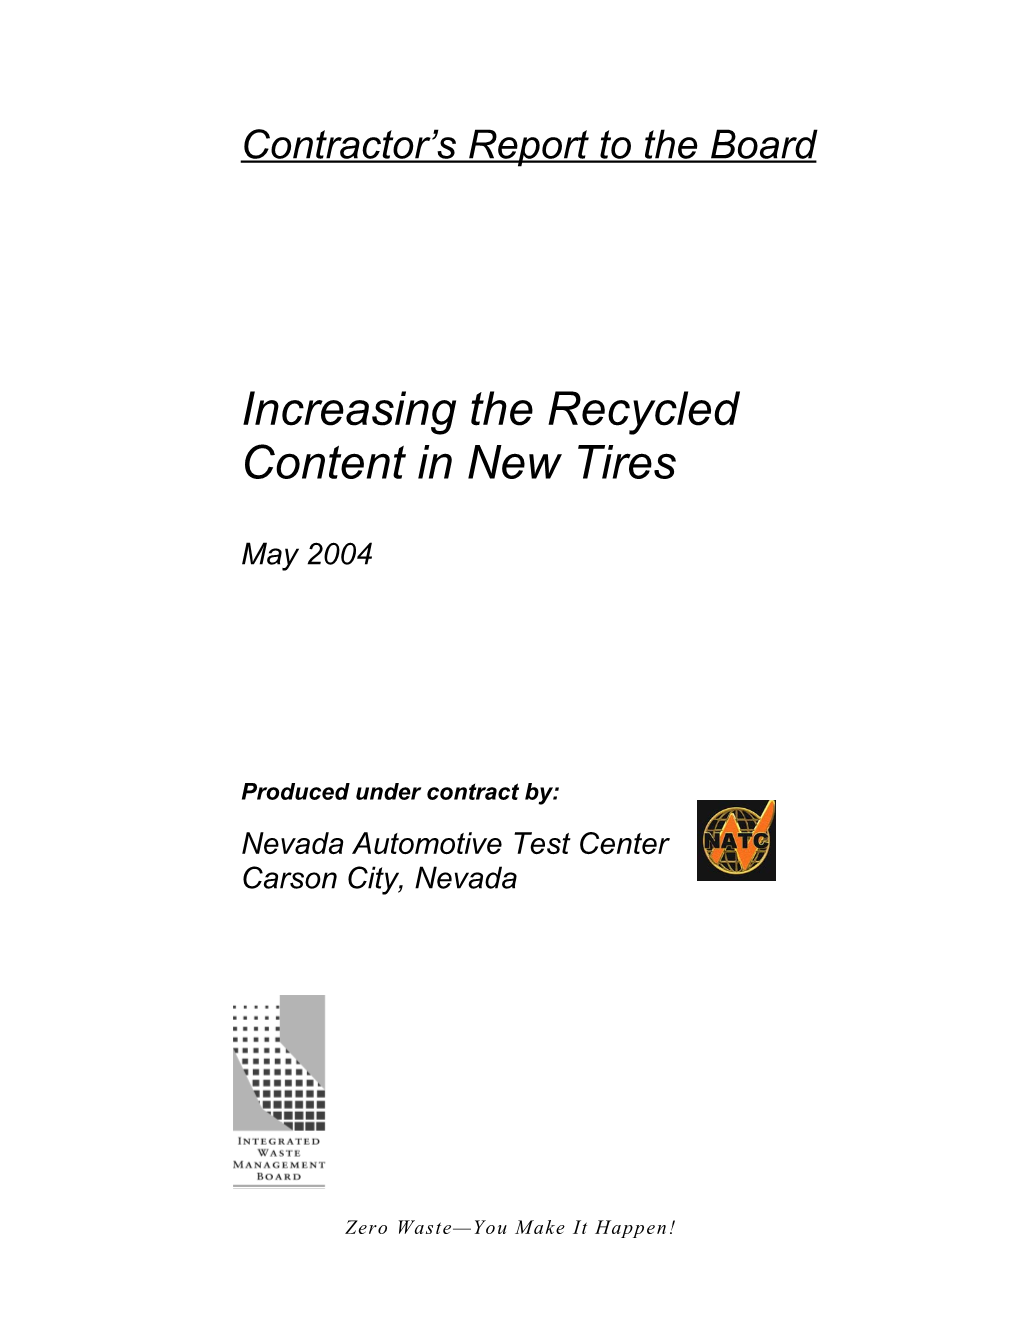 Increasing the Recycled Content in New Tires